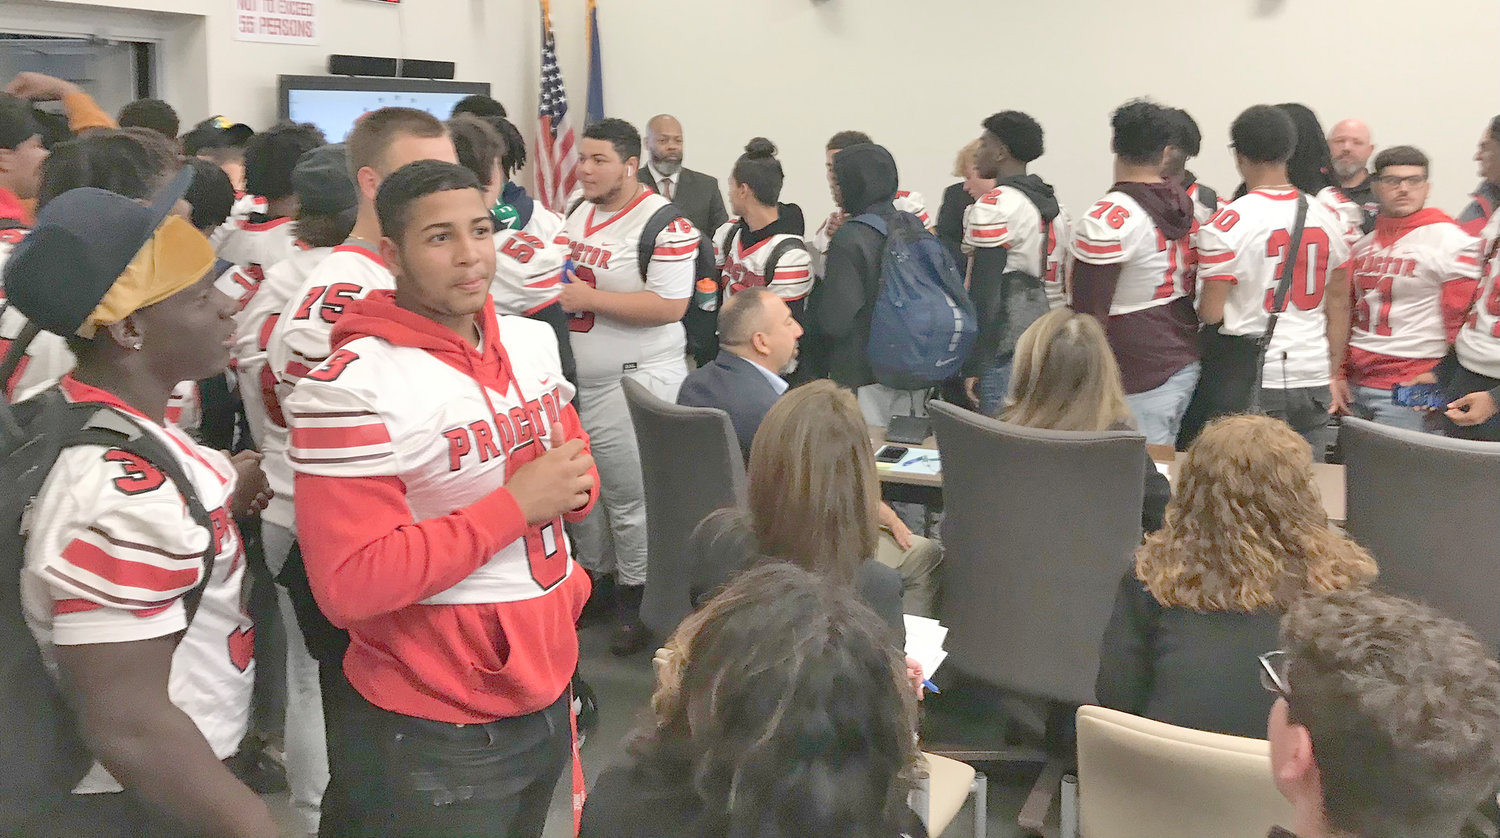 Members of the Thomas R. Proctor football team, along with fellow students from the girls varsity tennis team and the cheerleading squad, visited the Utica City School District Board of Education and their audience Tuesday night at their monthly meeting.